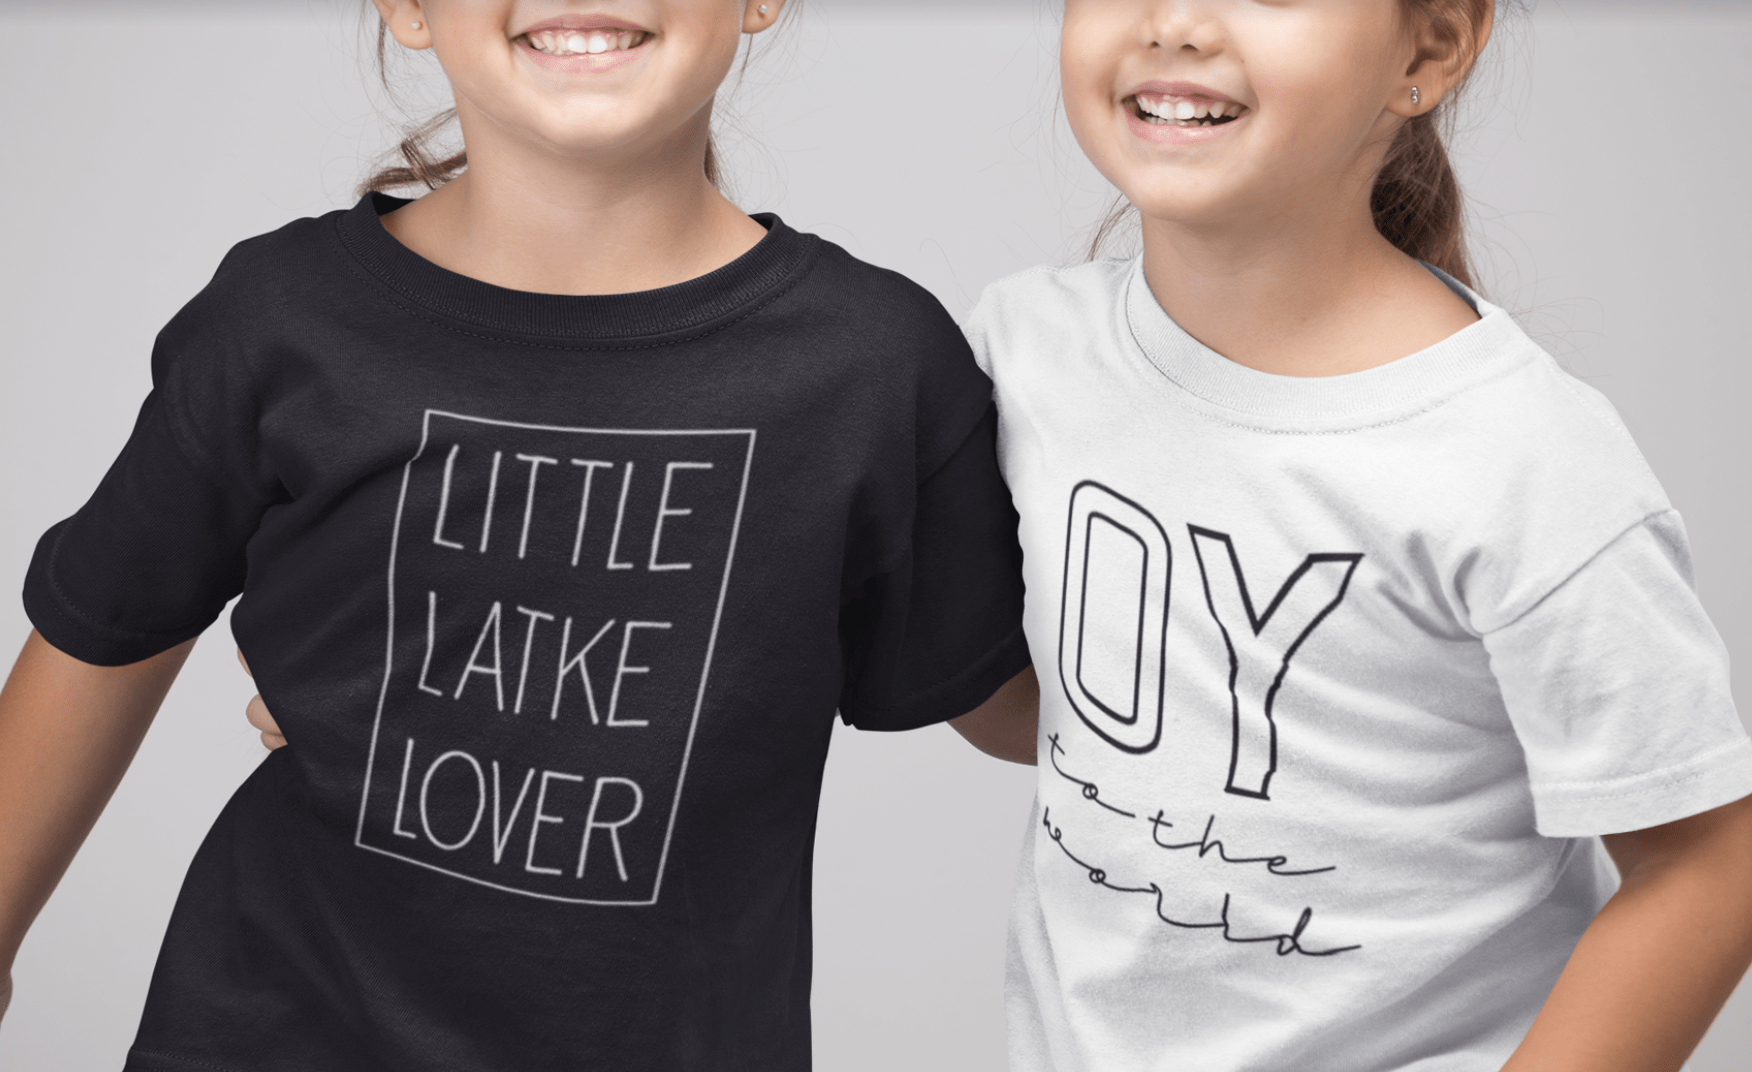 Challah Day Shop Kid Clothing Oy to the World T-Shirt - Baby and Kid Sizes